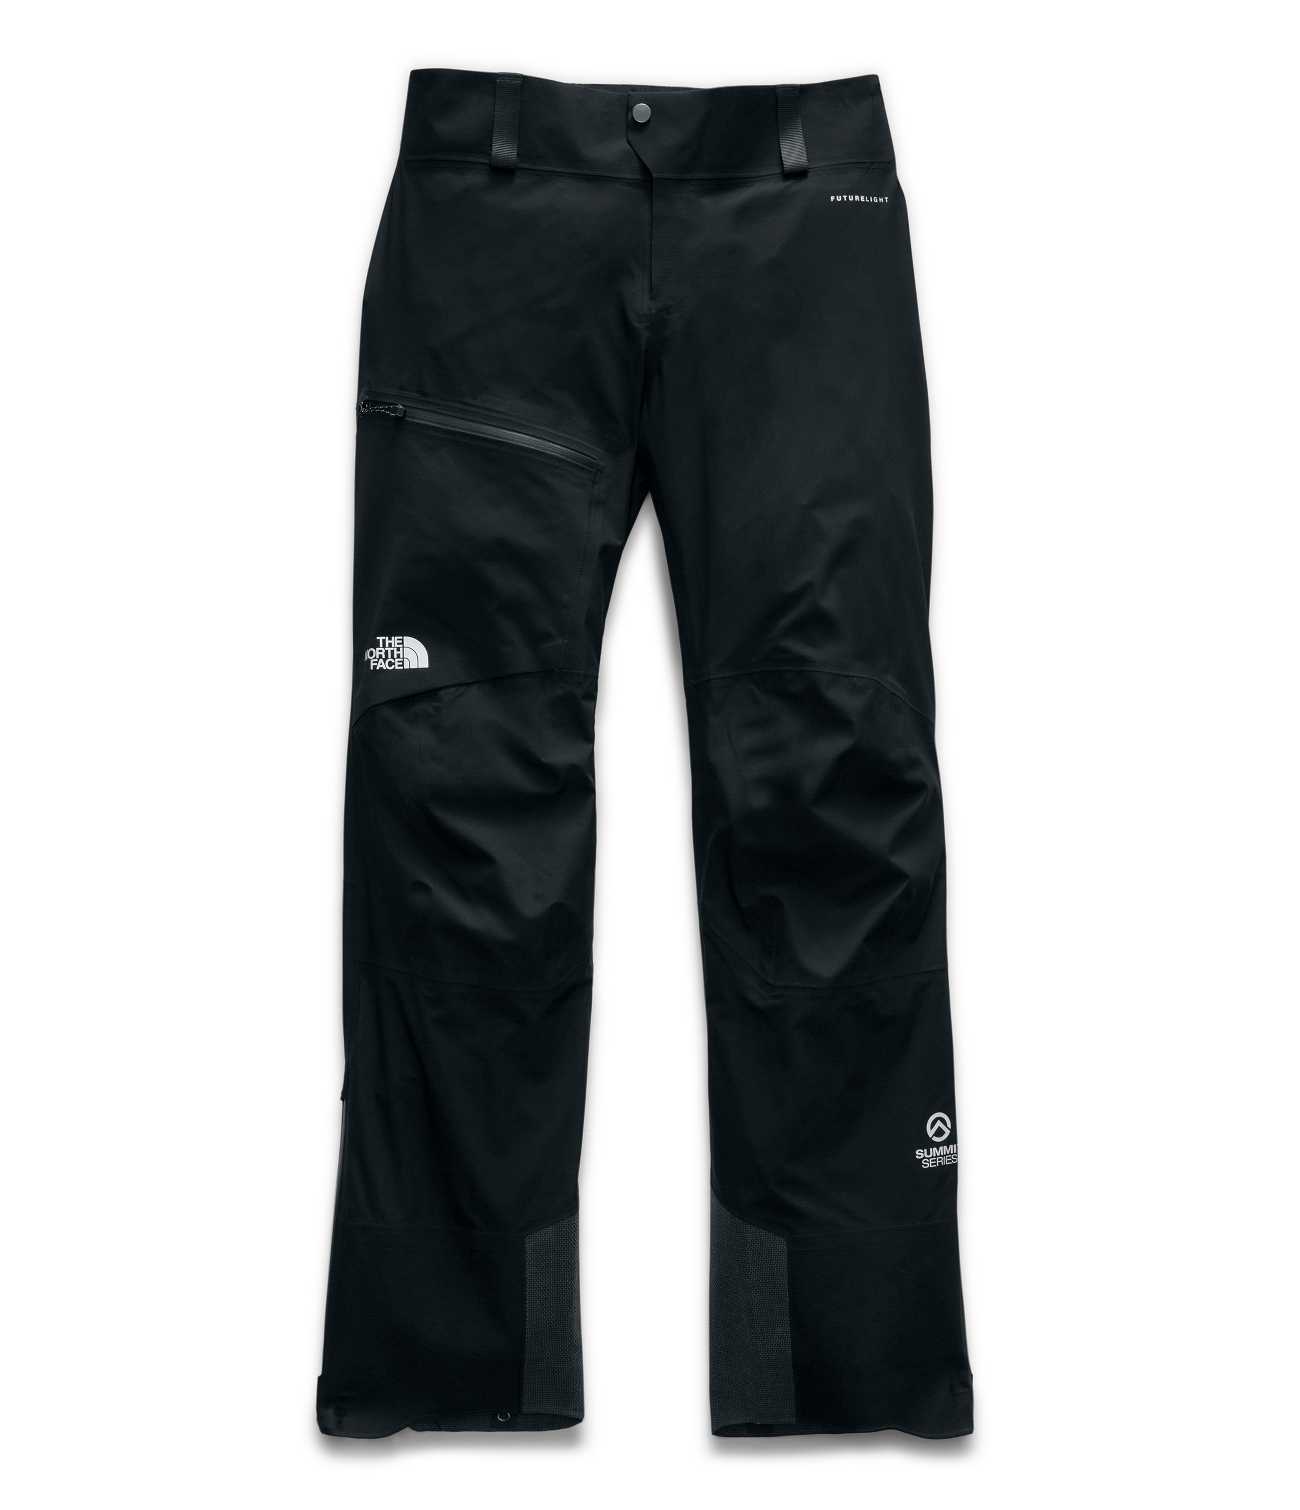 WOMEN'S SUMMIT L5 LIGHTWEIGHT PANTS | The North Face | The North 